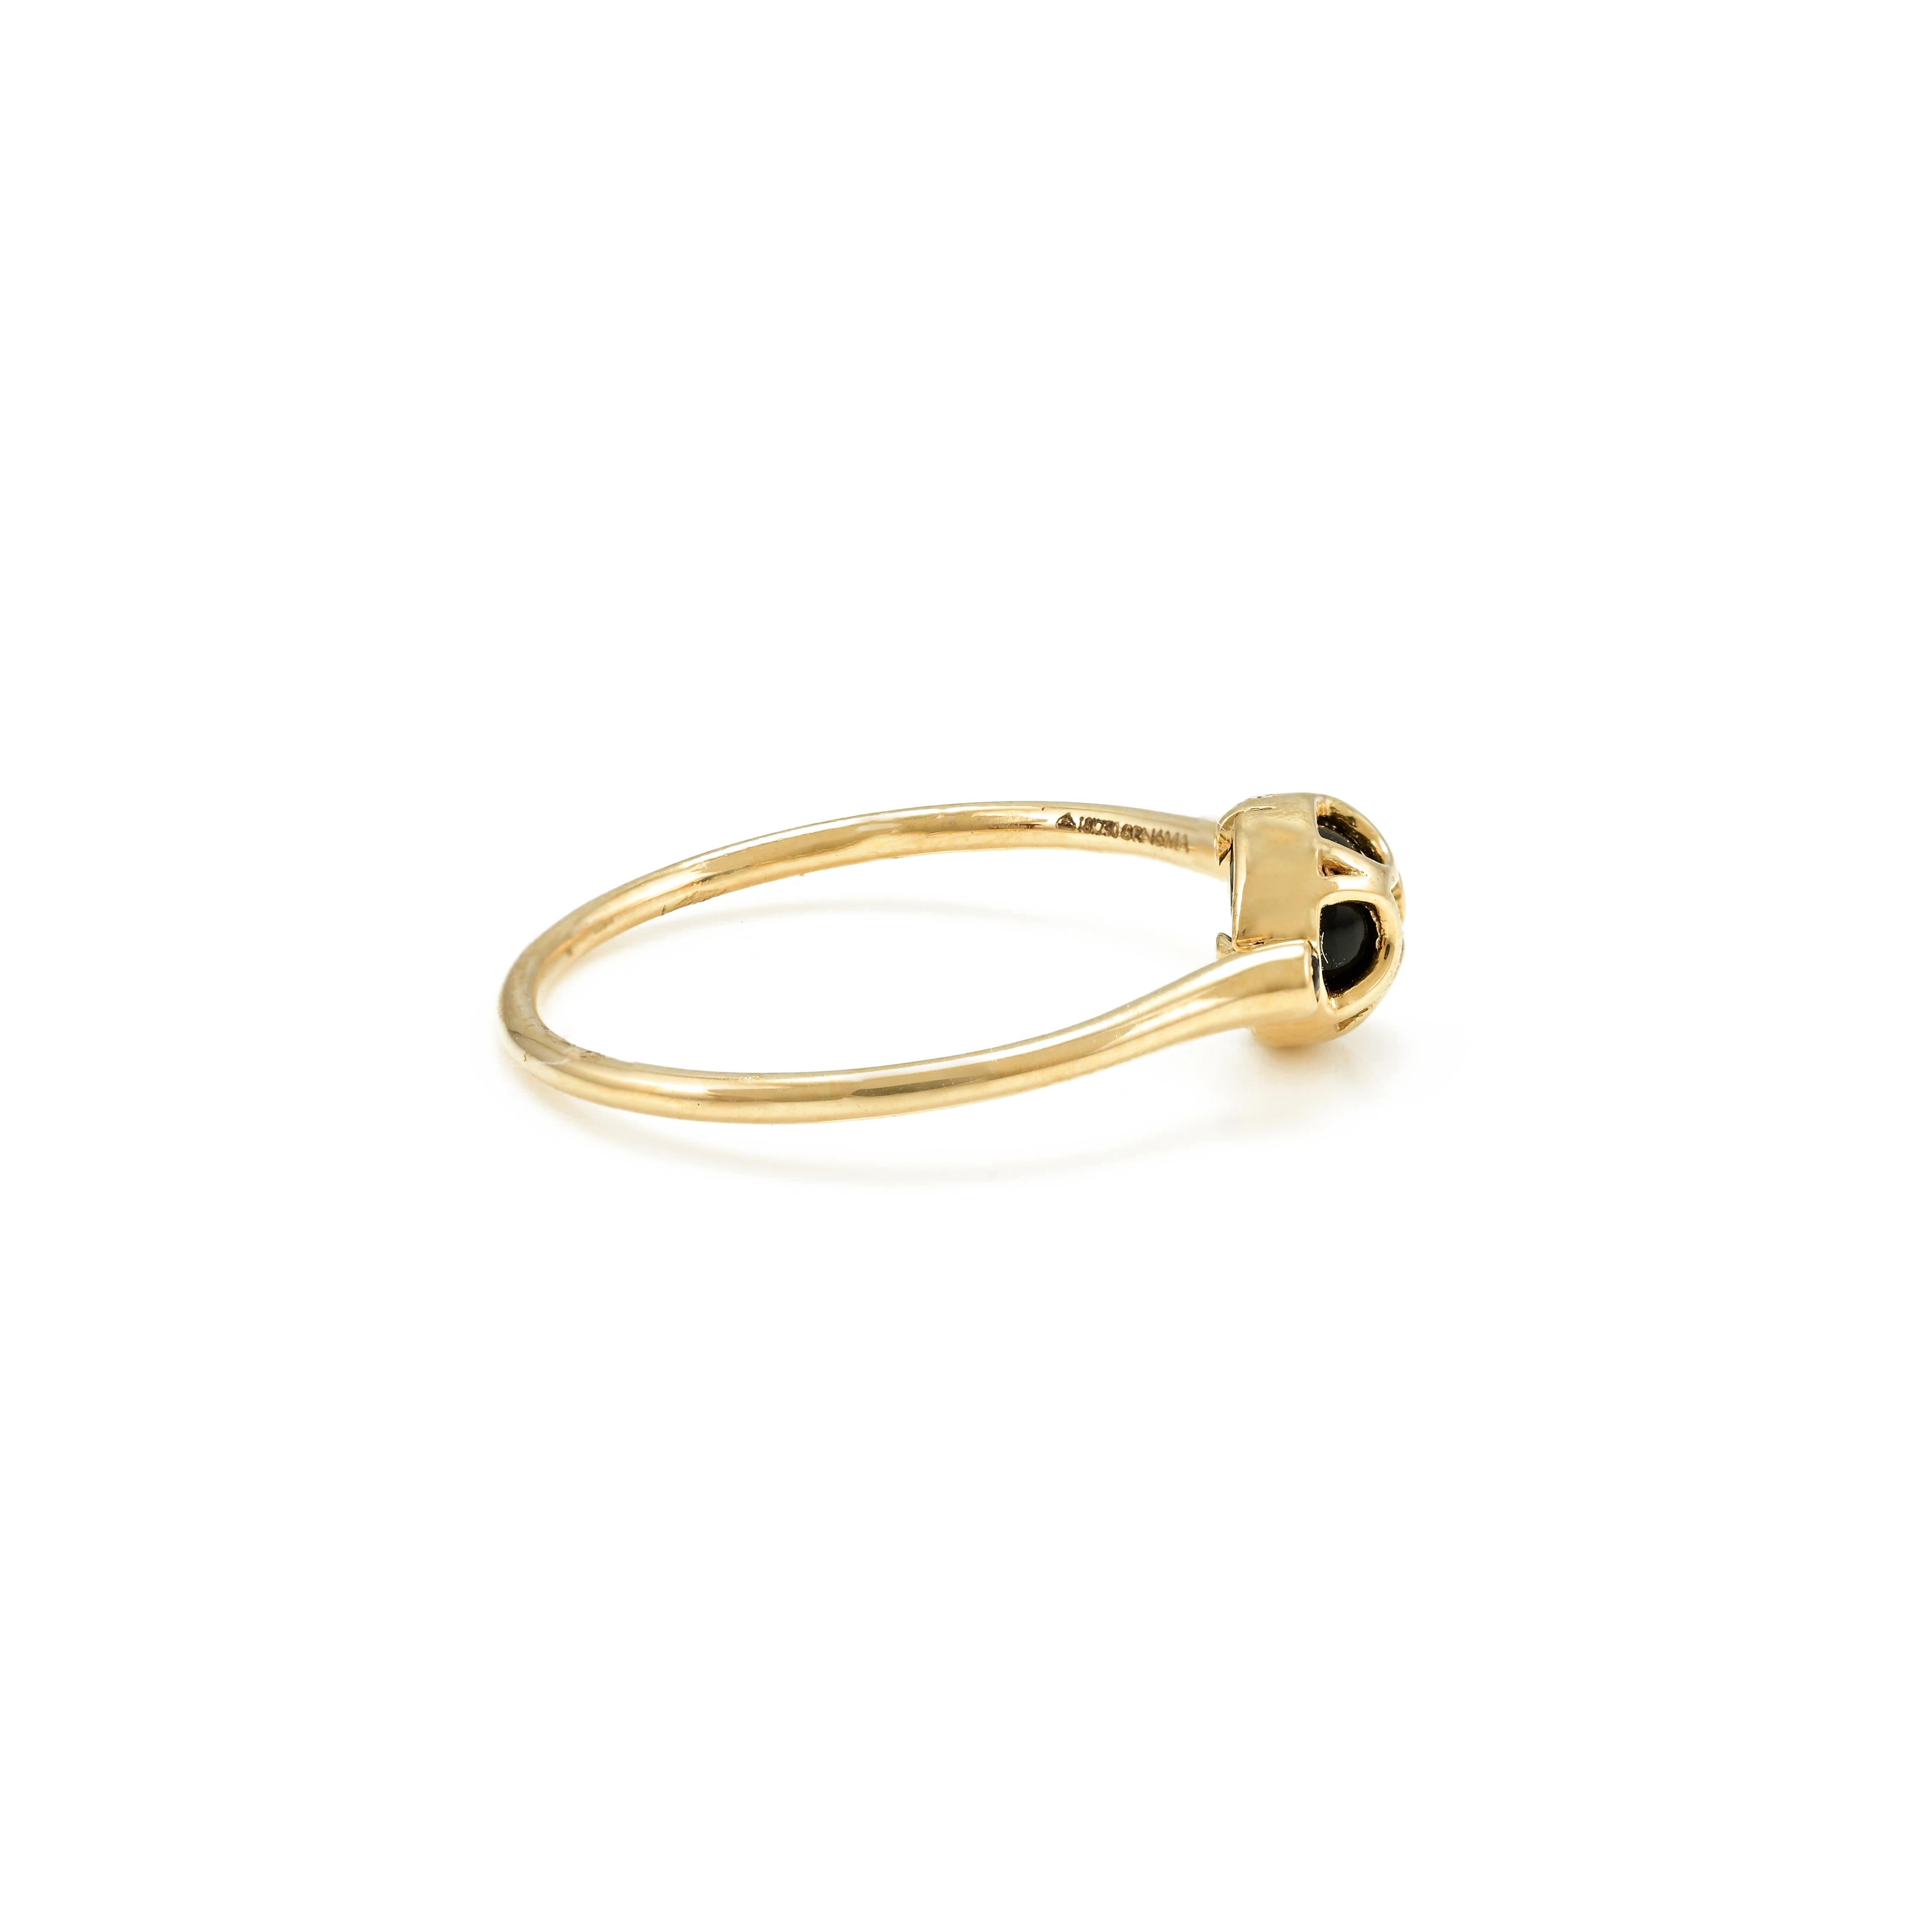 For Sale:  Unique 18k Solid Yellow Gold Dainty Black Onyx Gemstone Everyday Ring For Her 3